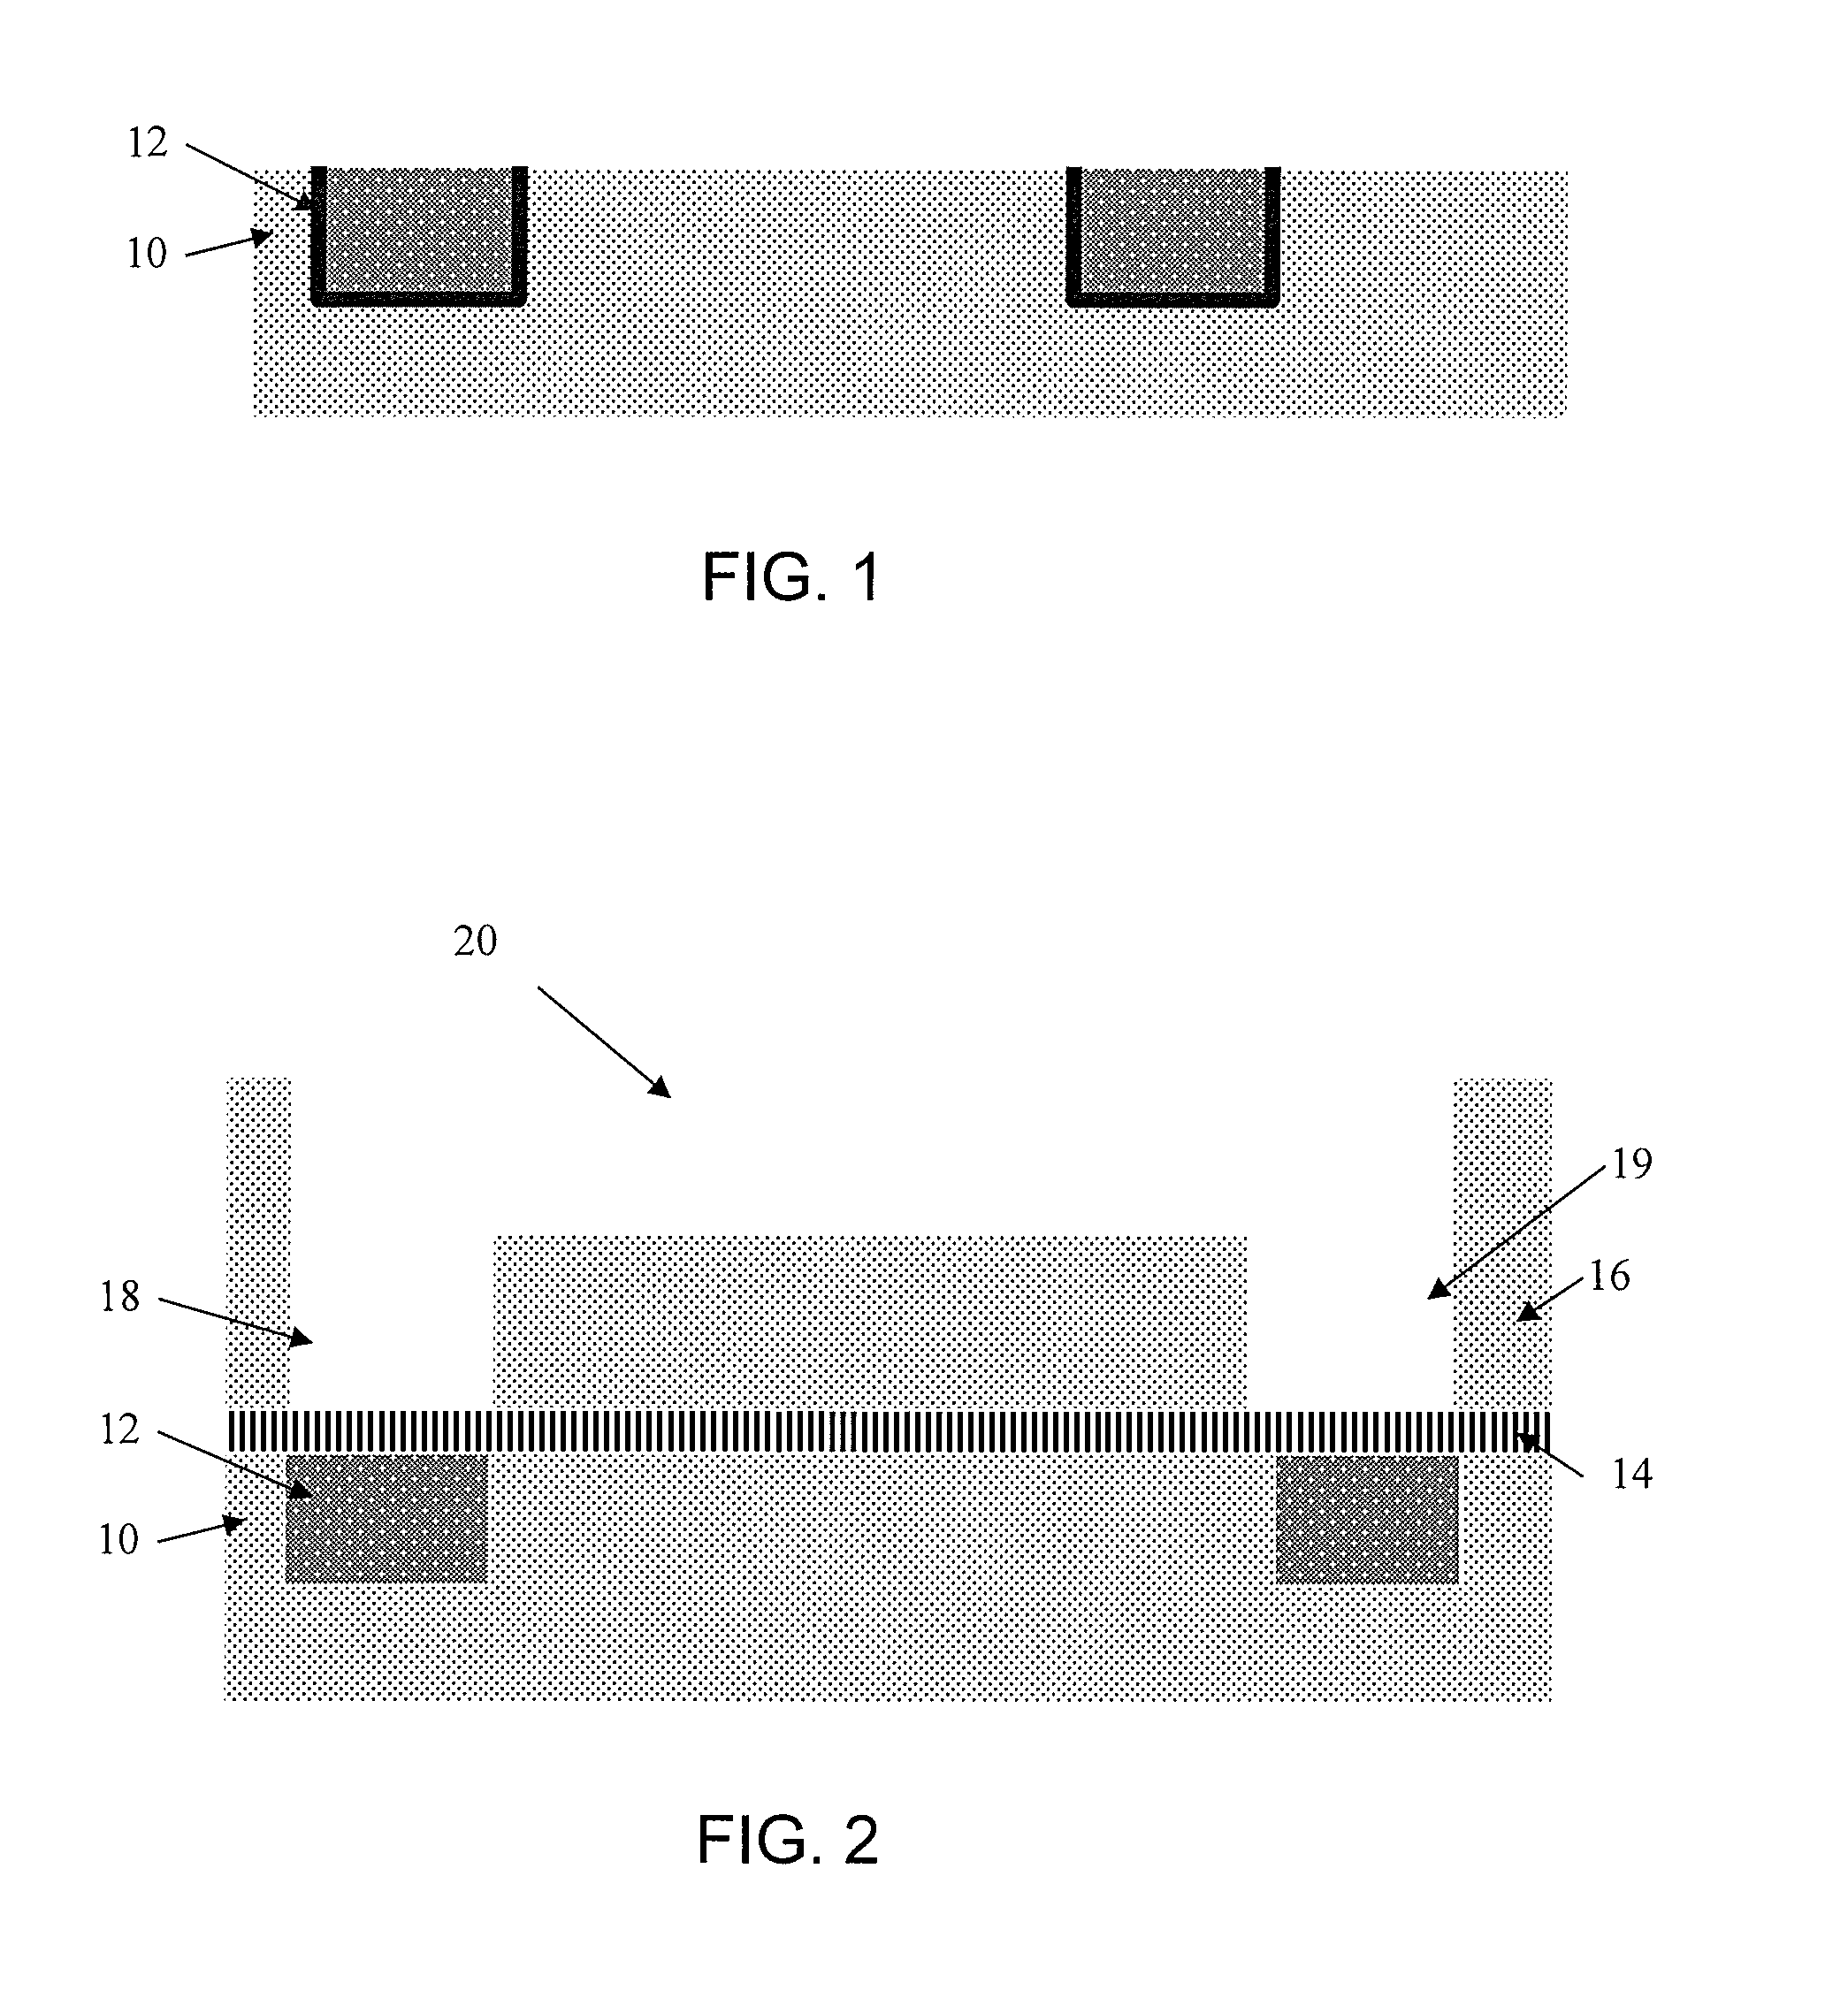 Interconnect structure and method of making same